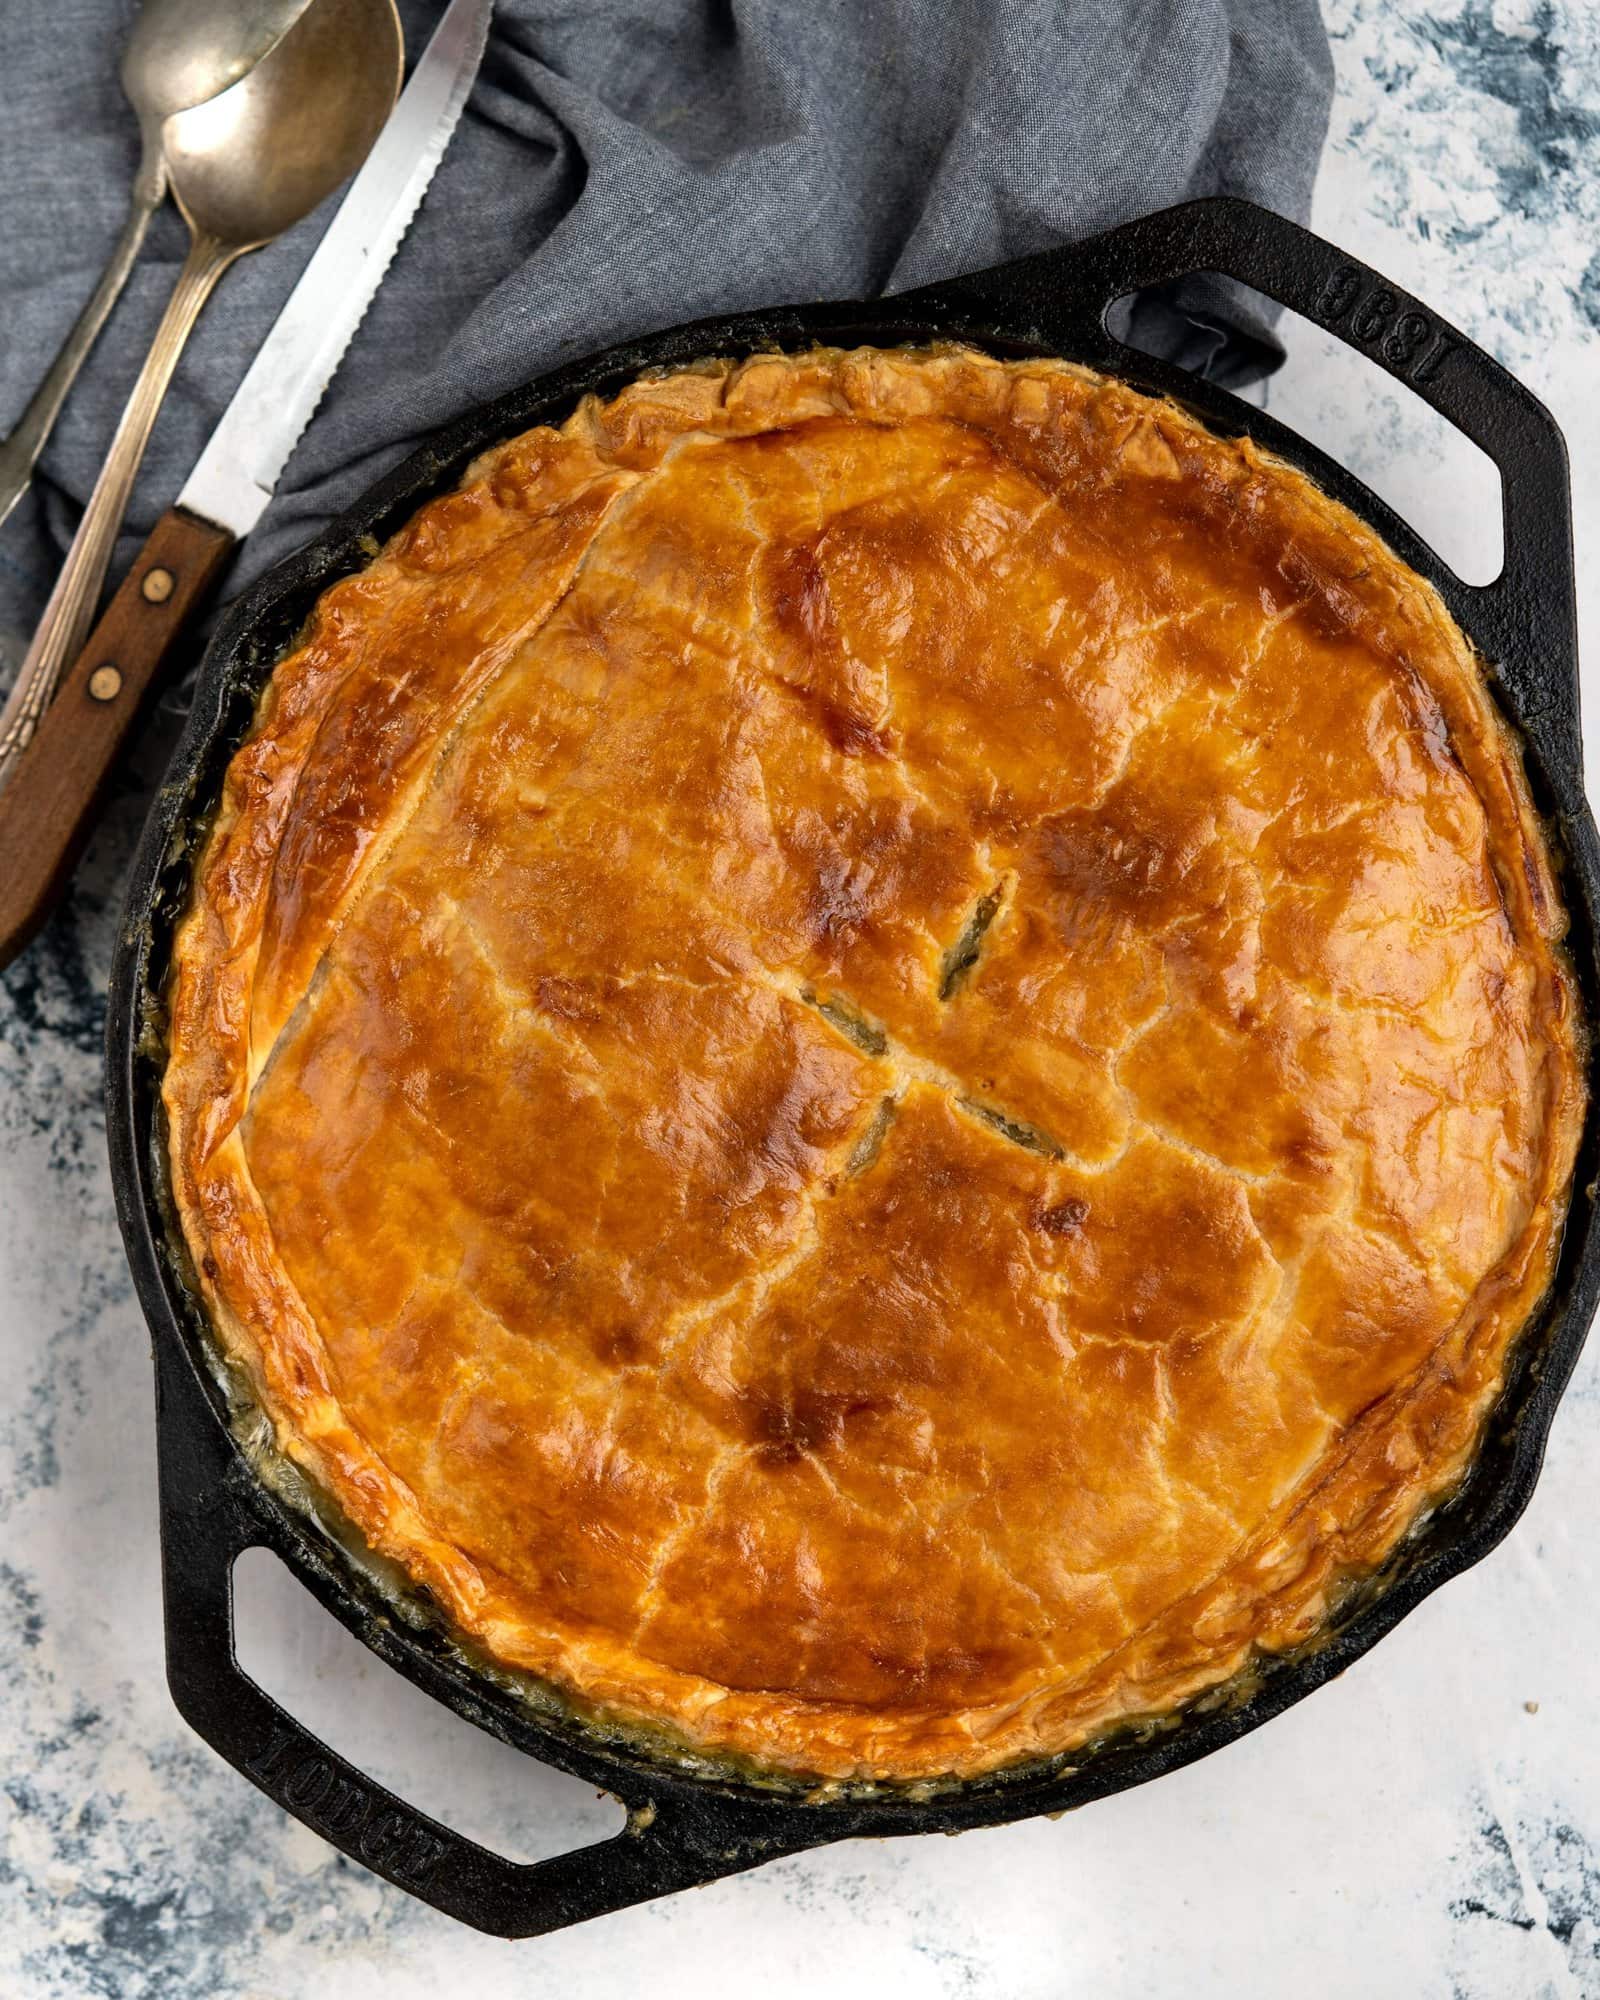 Flaky pastry on top of delicious chicken, mushroom and vegetable filling in Chicken Pot Pie, made in a cast iron skillet.